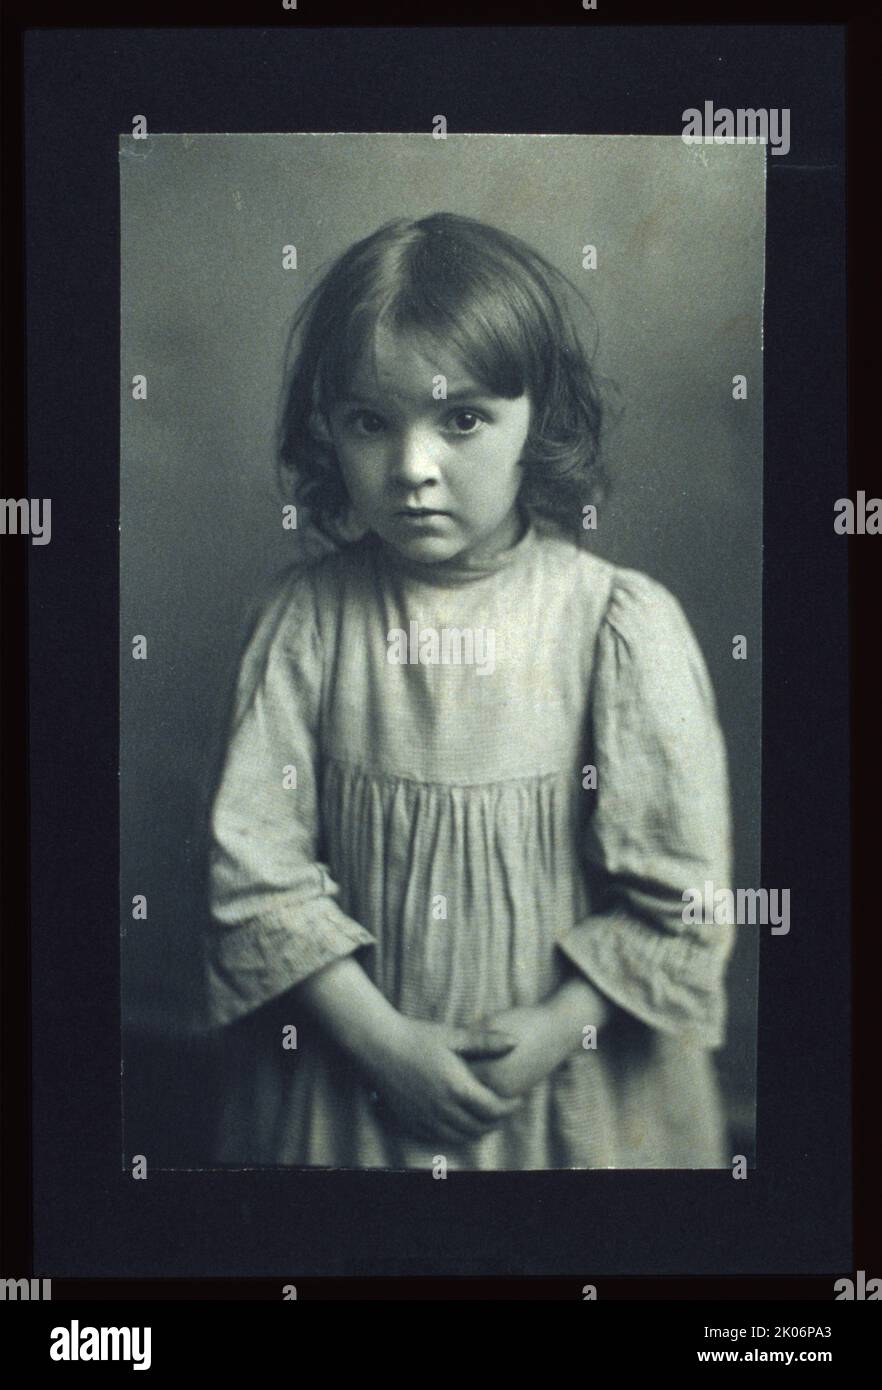 A-listnin' to the witch-tales 'at Annie tells about, c1900. Photograph shows a young girl with her hands clasped in front, staring intently forward. Photograph was an illustration for James Whitcomb Riley's poem &quot;Little Orphant Annie&quot; printed in Brownell's &quot;Dream Children&quot;. Previously attributed to Emma Justine Farnsworth. Stock Photo